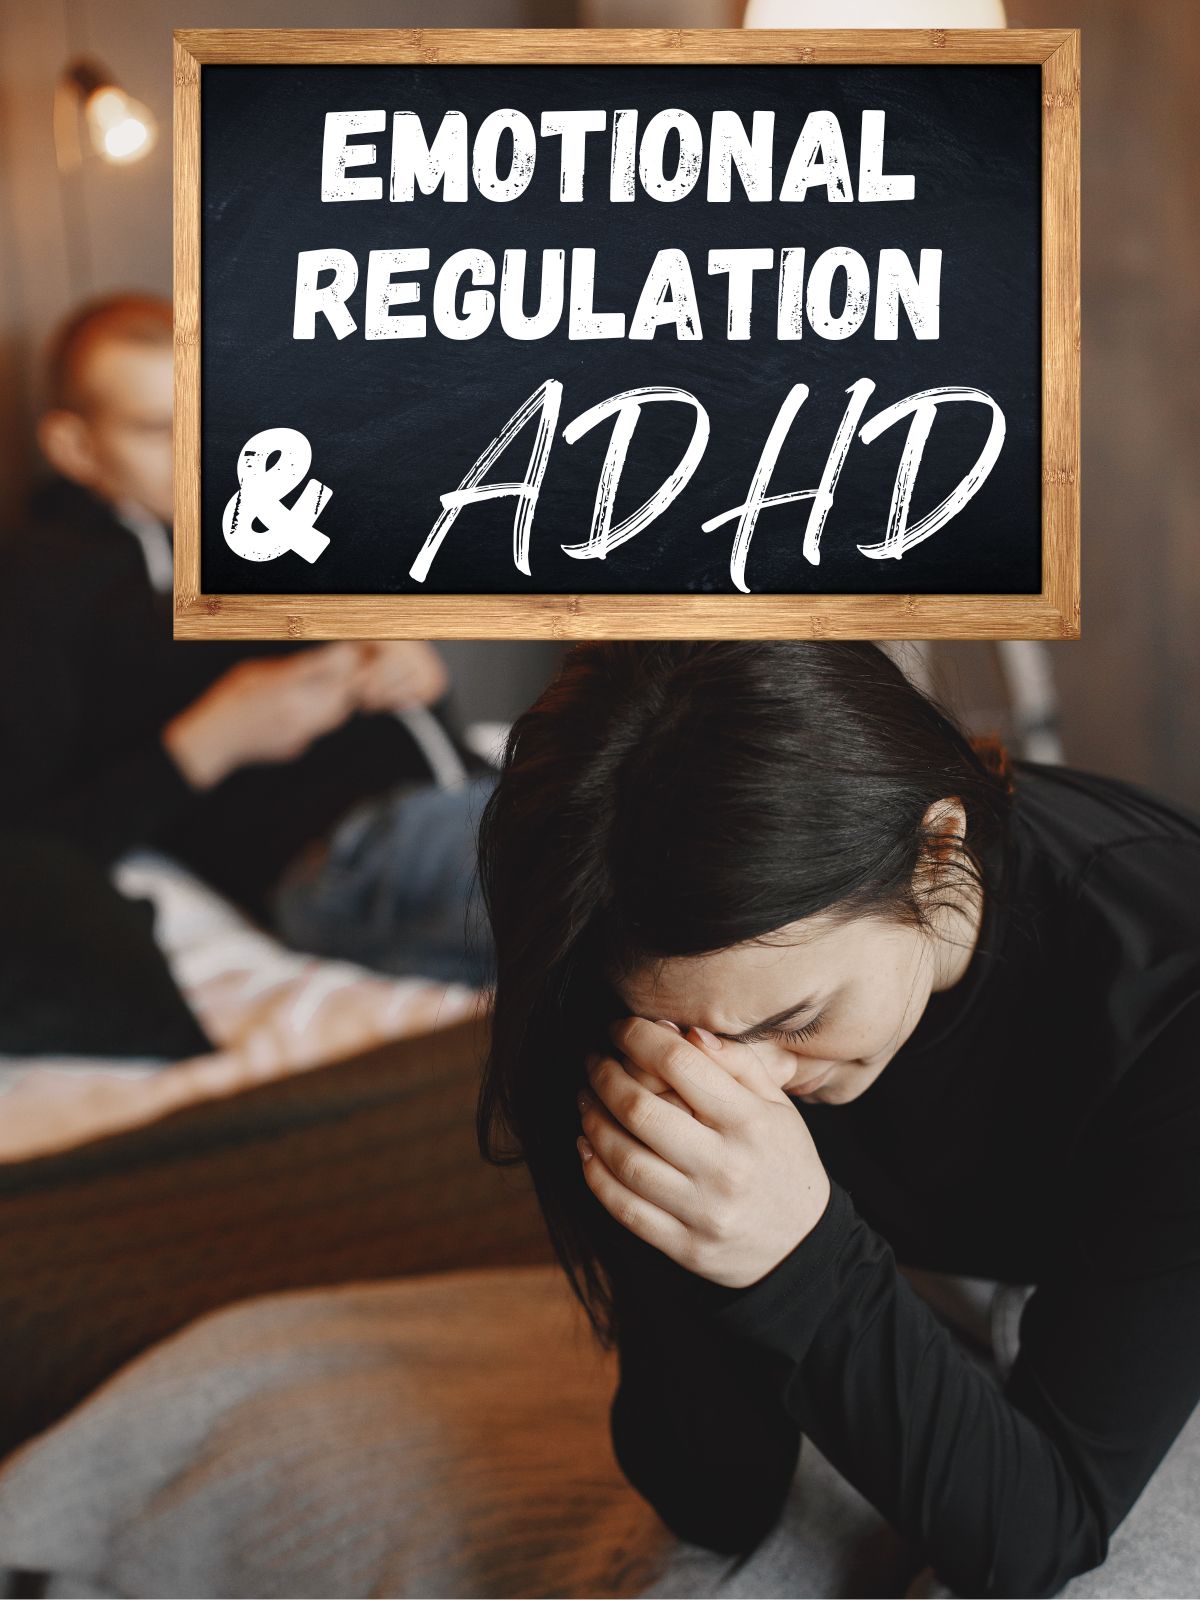 A woman crying with the text "emotional regulation and ADHD".